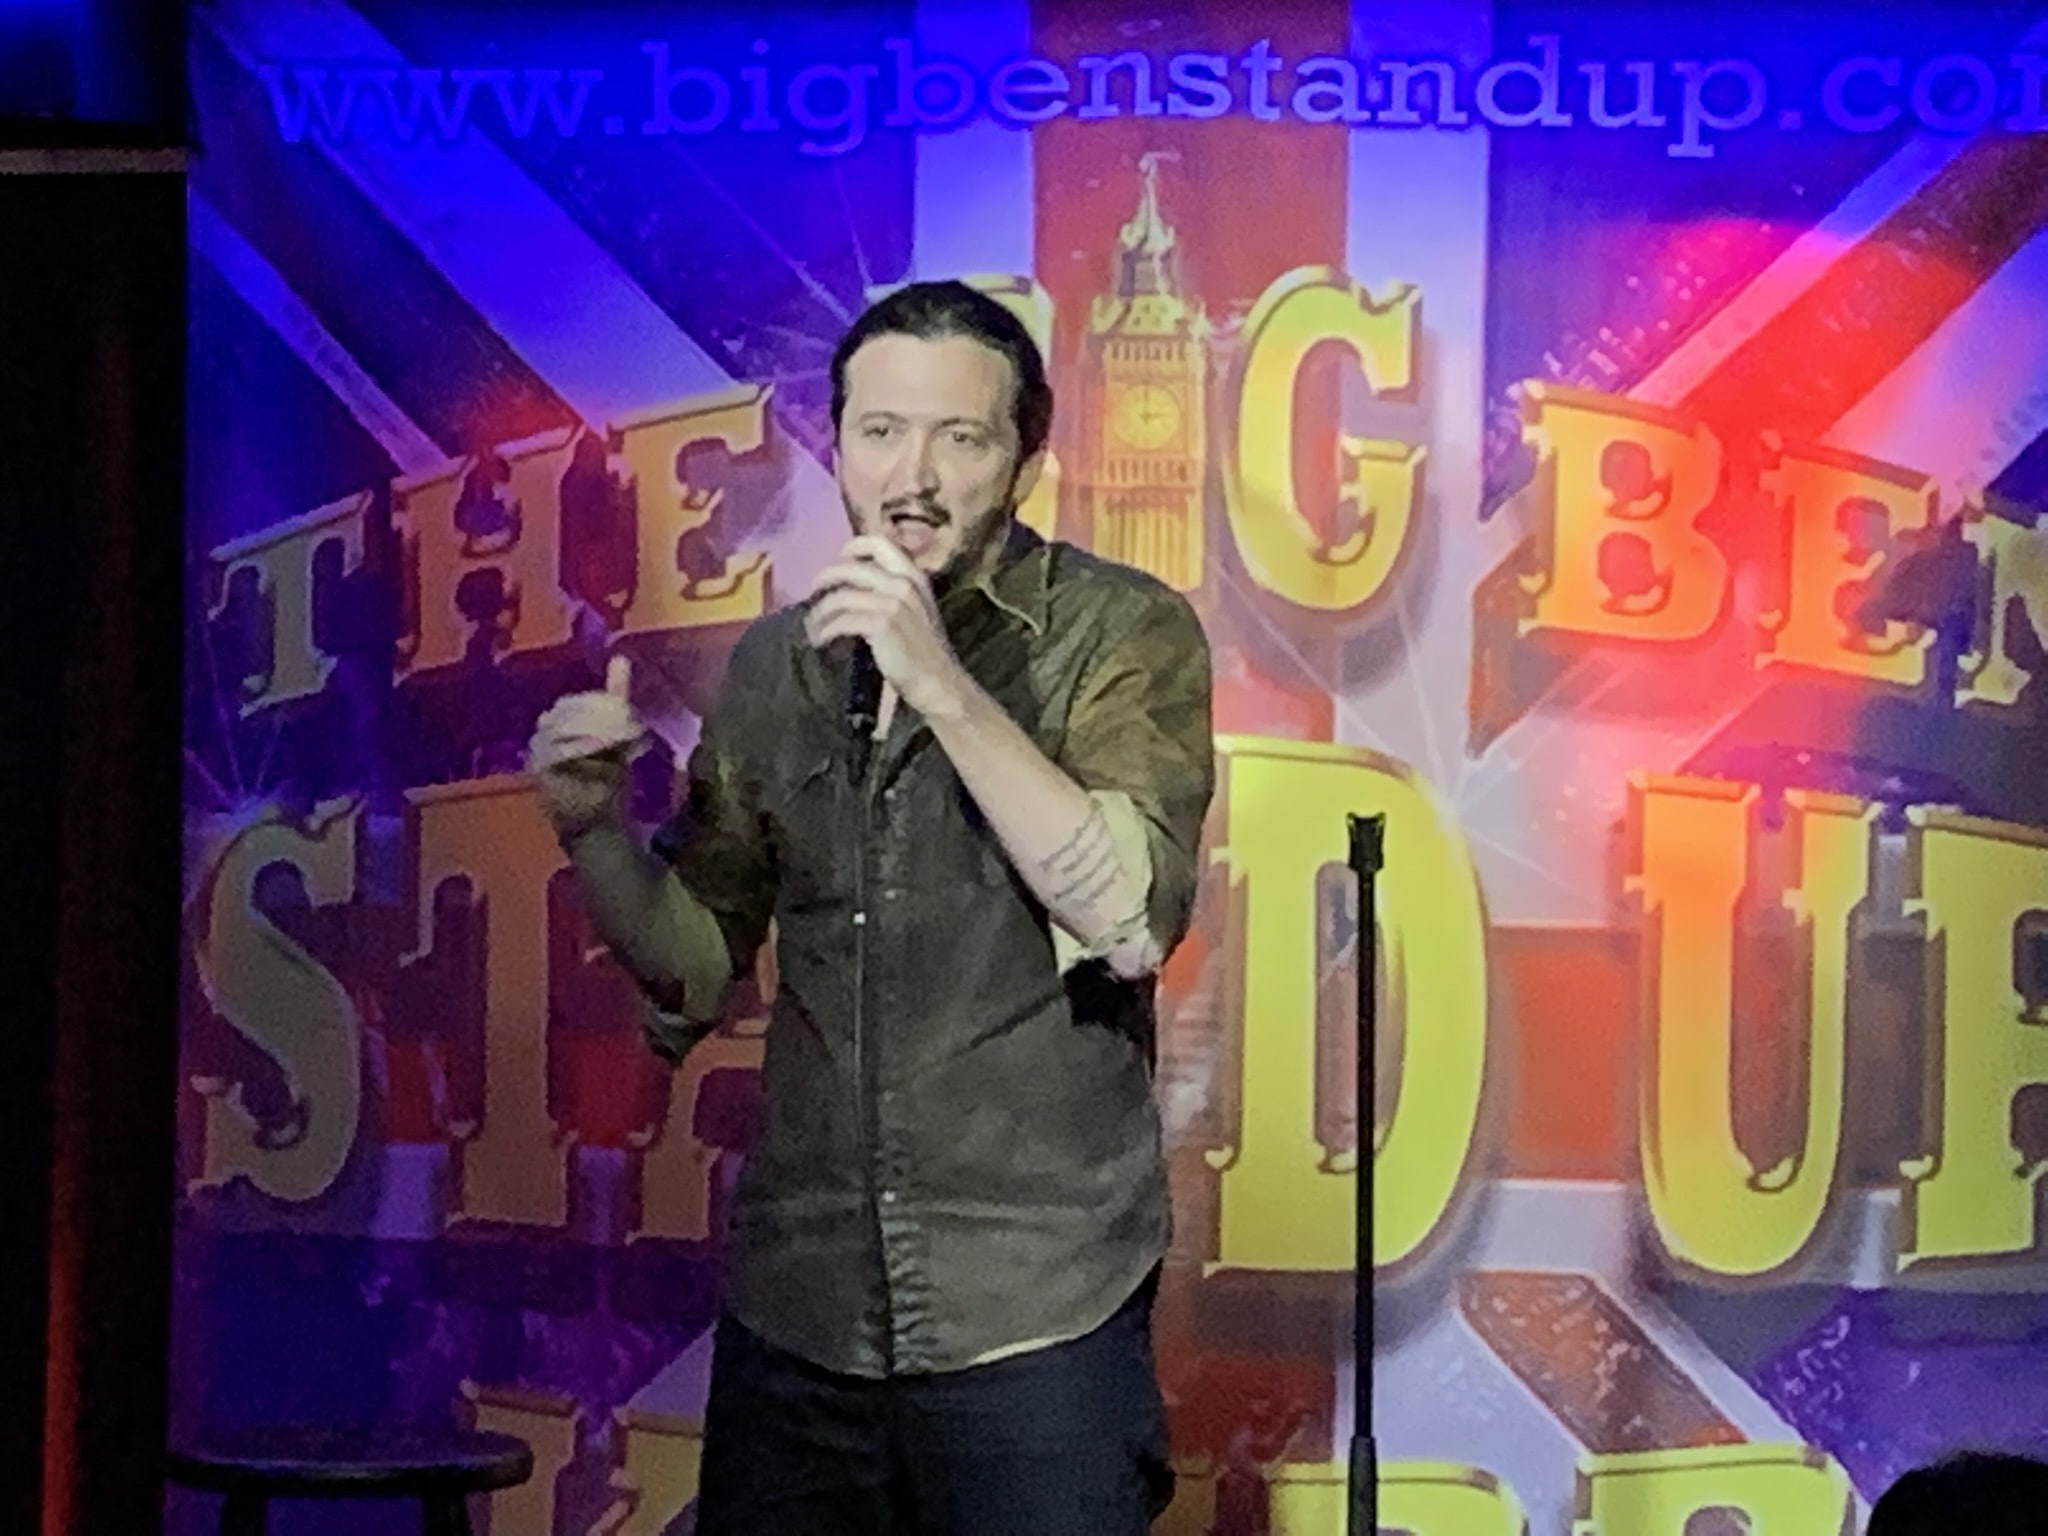 Ler champ – Photo from Big Ben Standup by Tomas B. (03/10/2022)